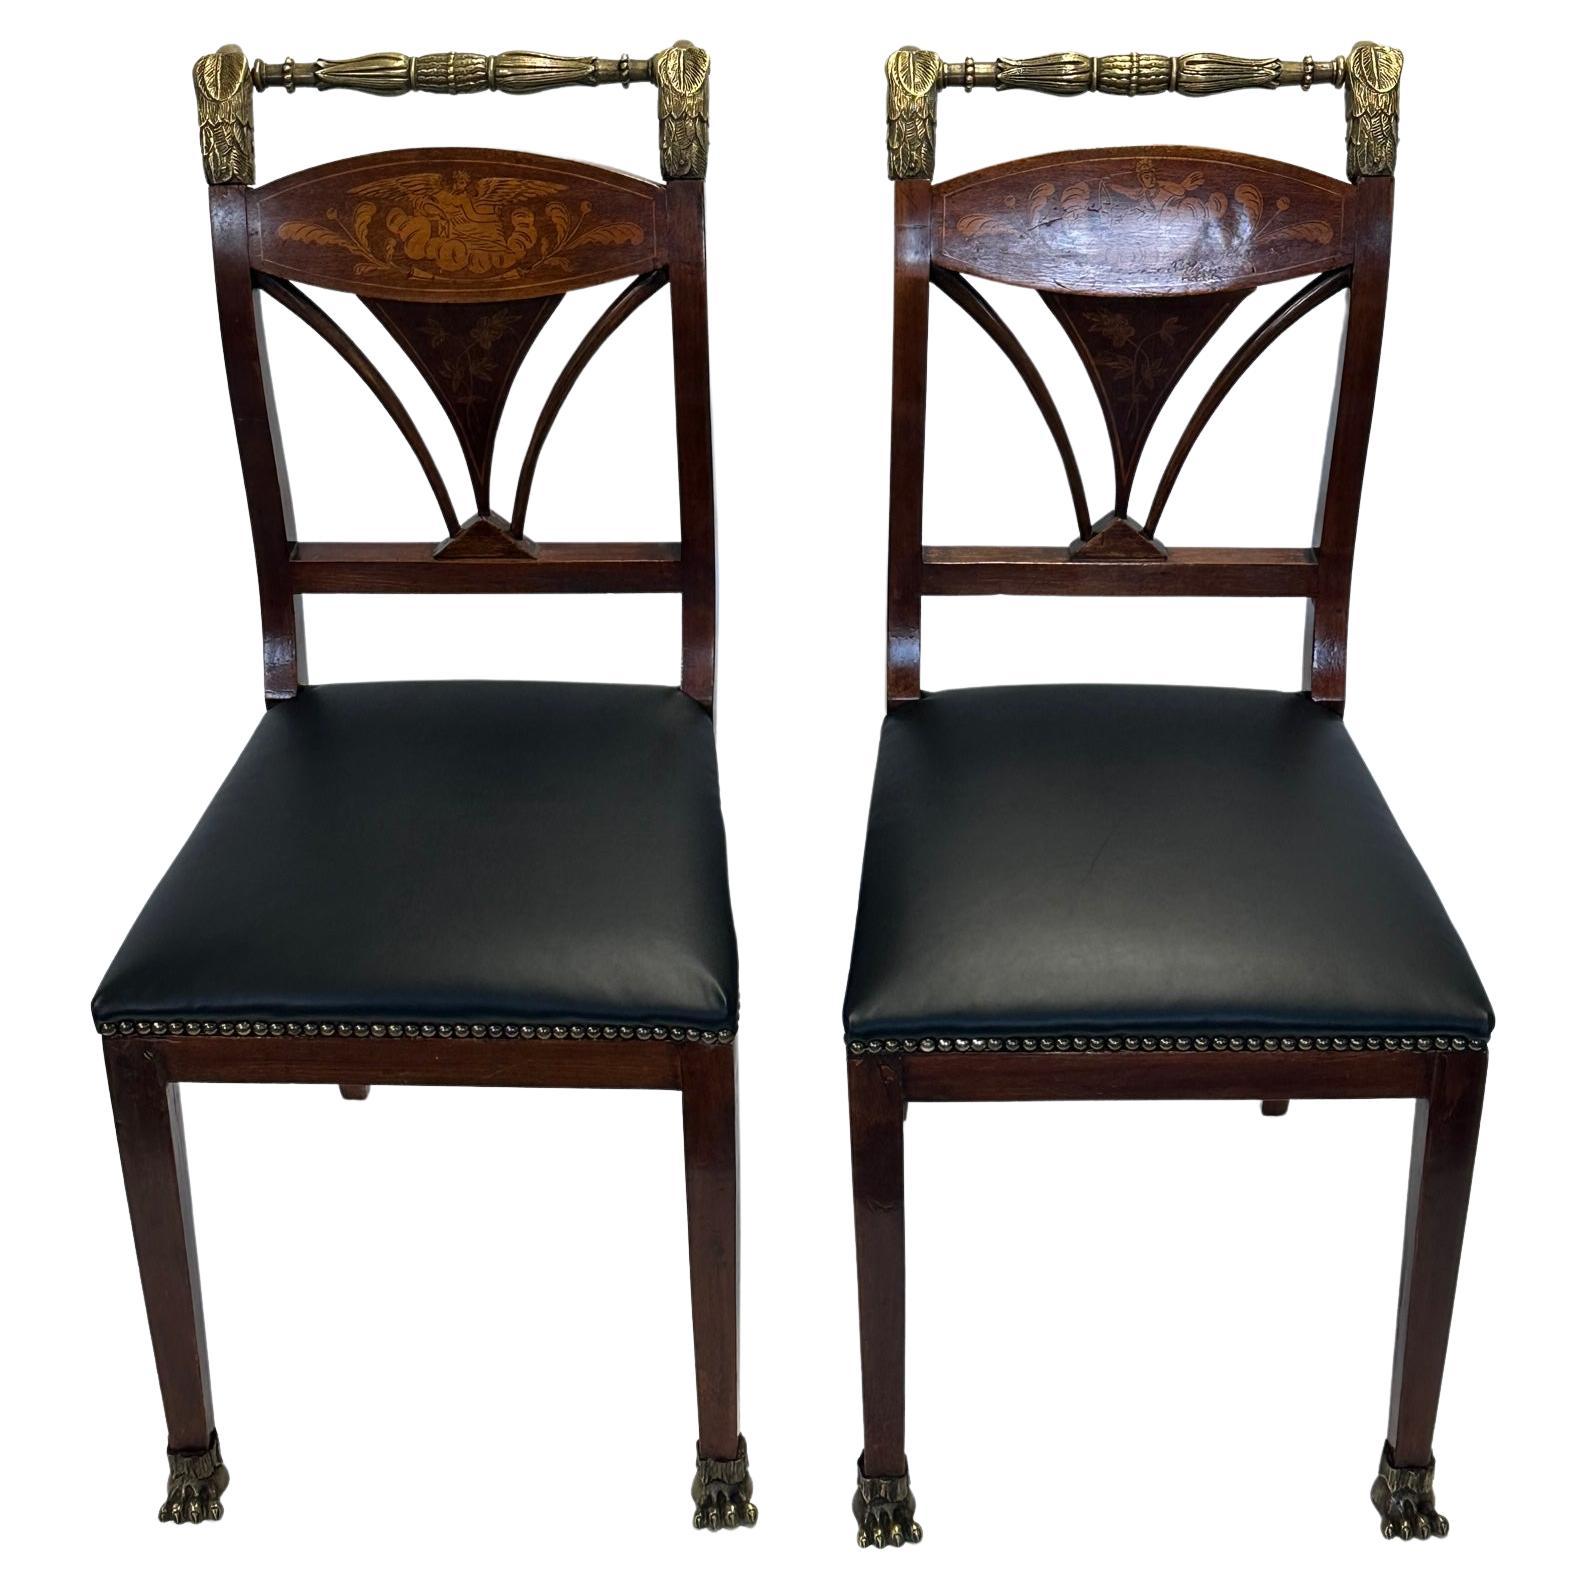 Amazing Pair of Early 19th Century Baltic Mahogany Eagle Motif Side Chairs